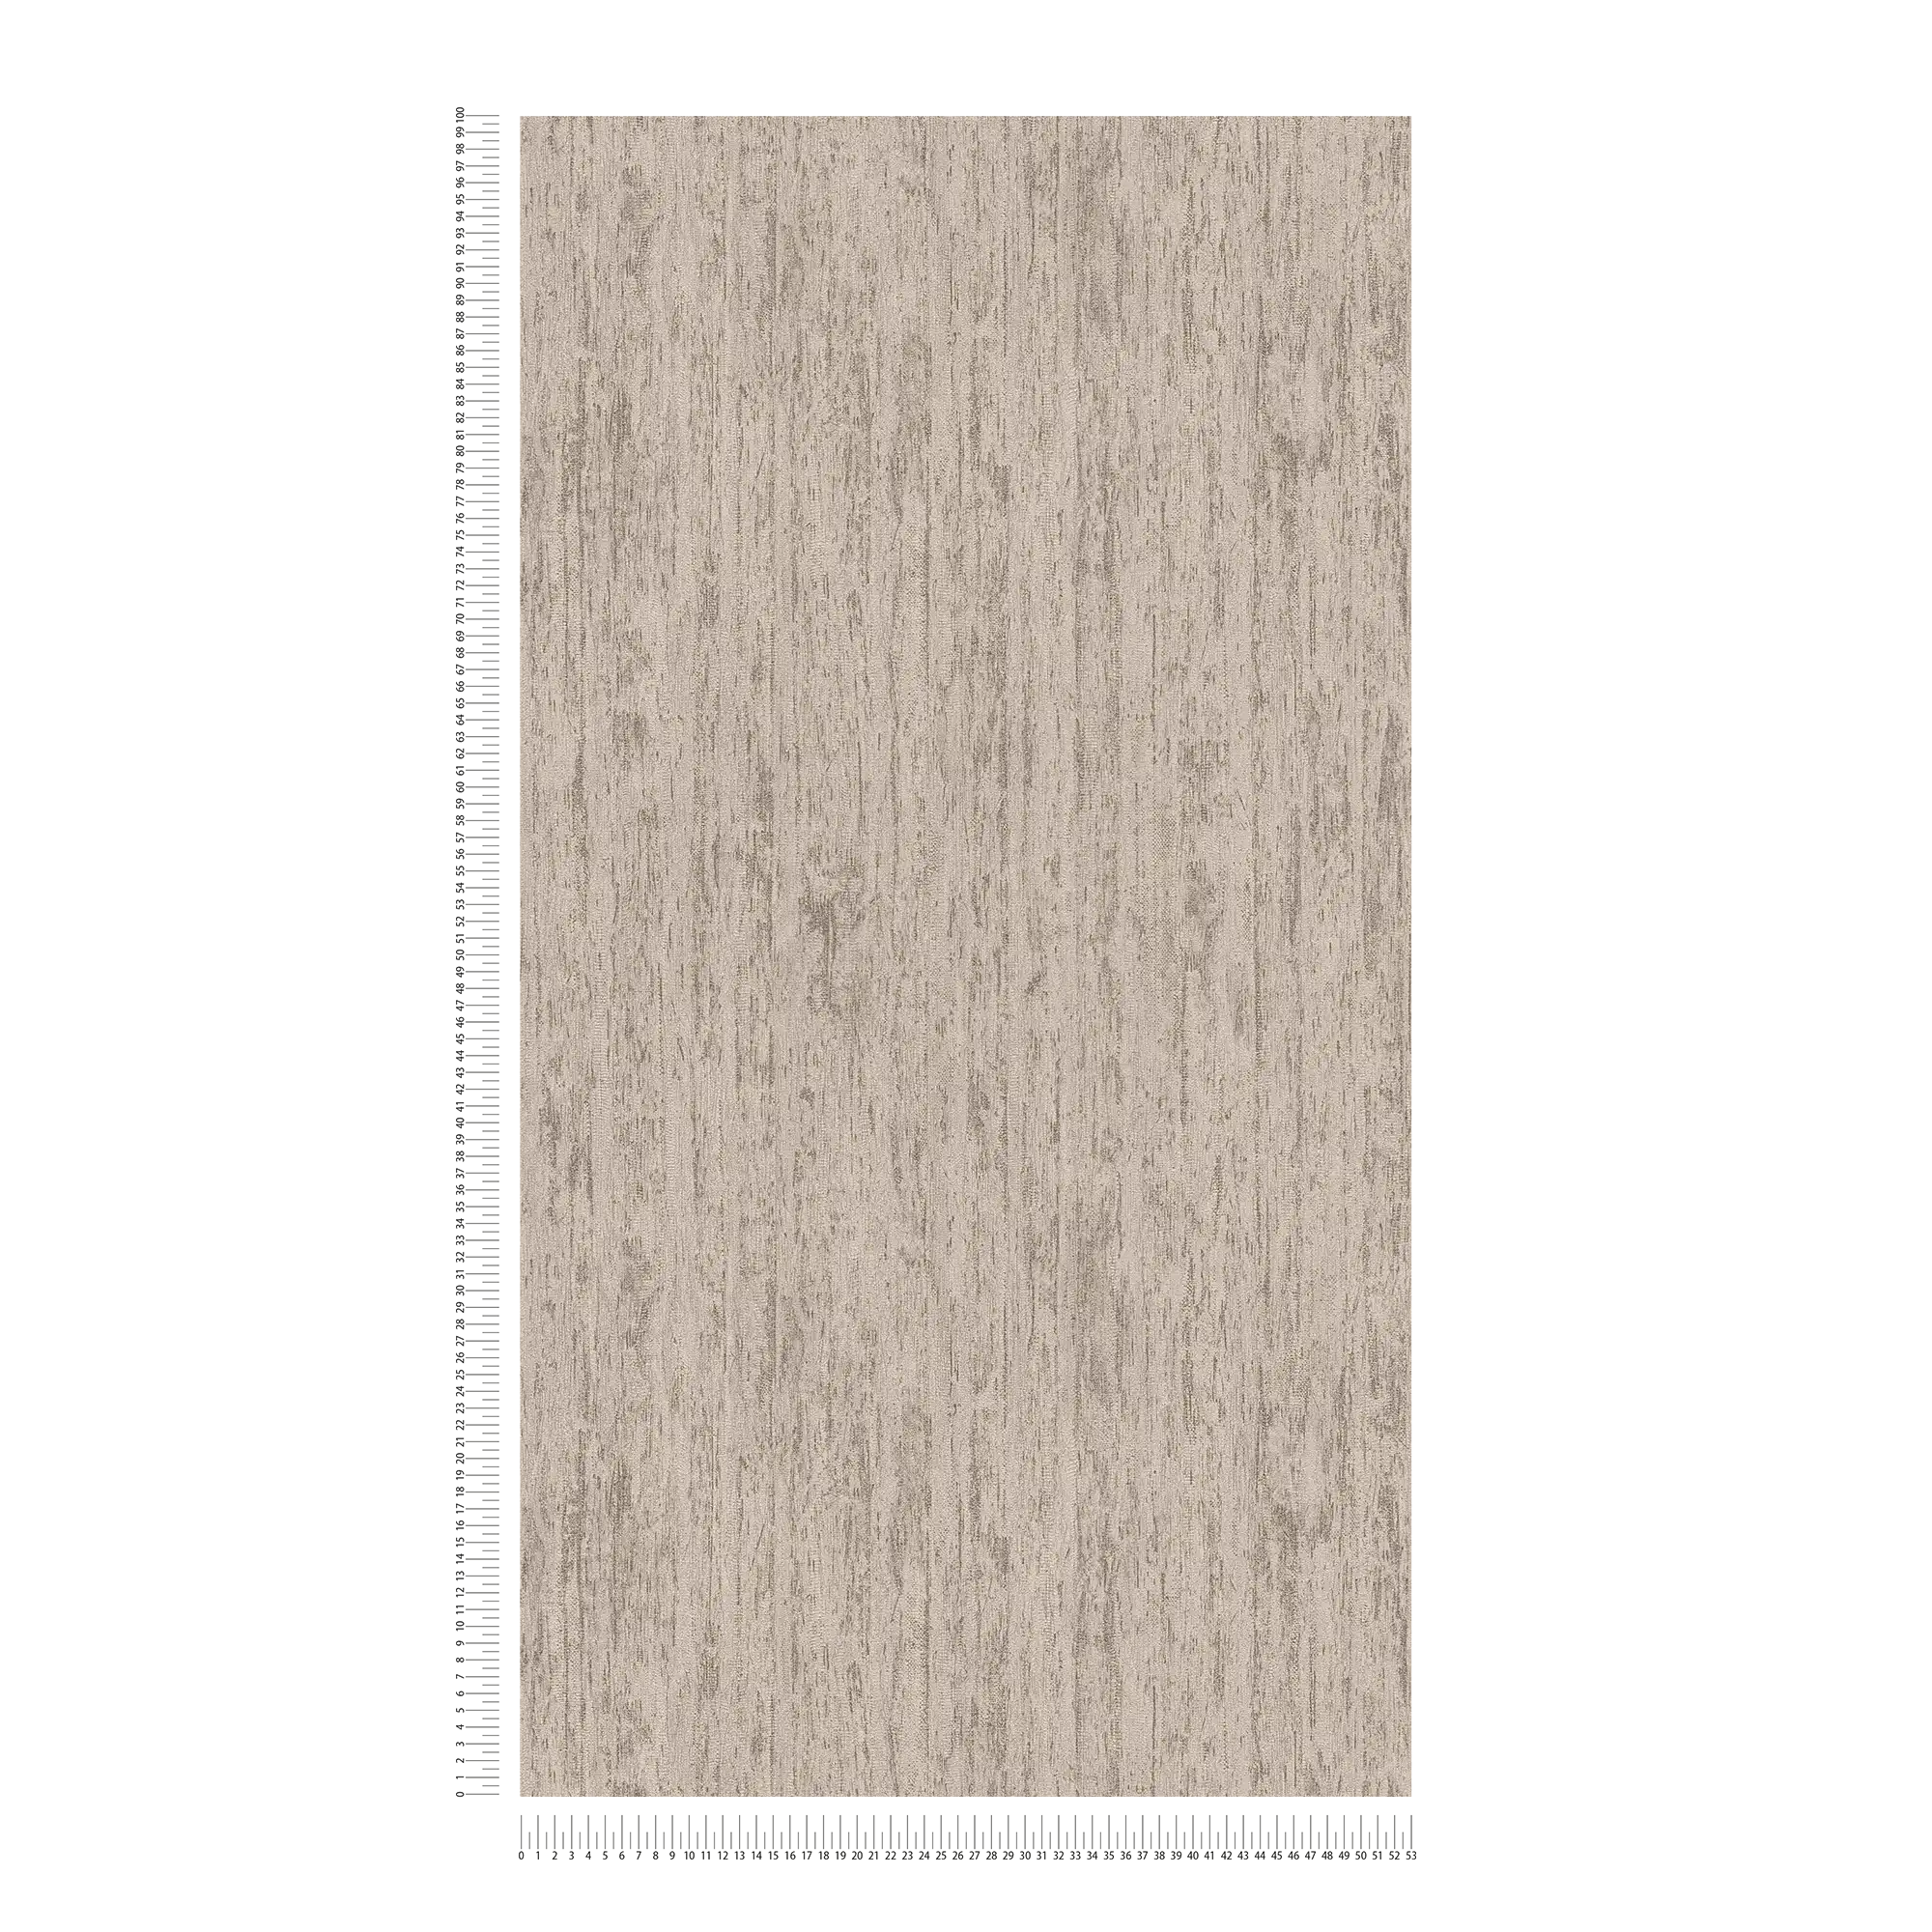             Structured plain wallpaper, slightly glossy - grey, beige, silver
        